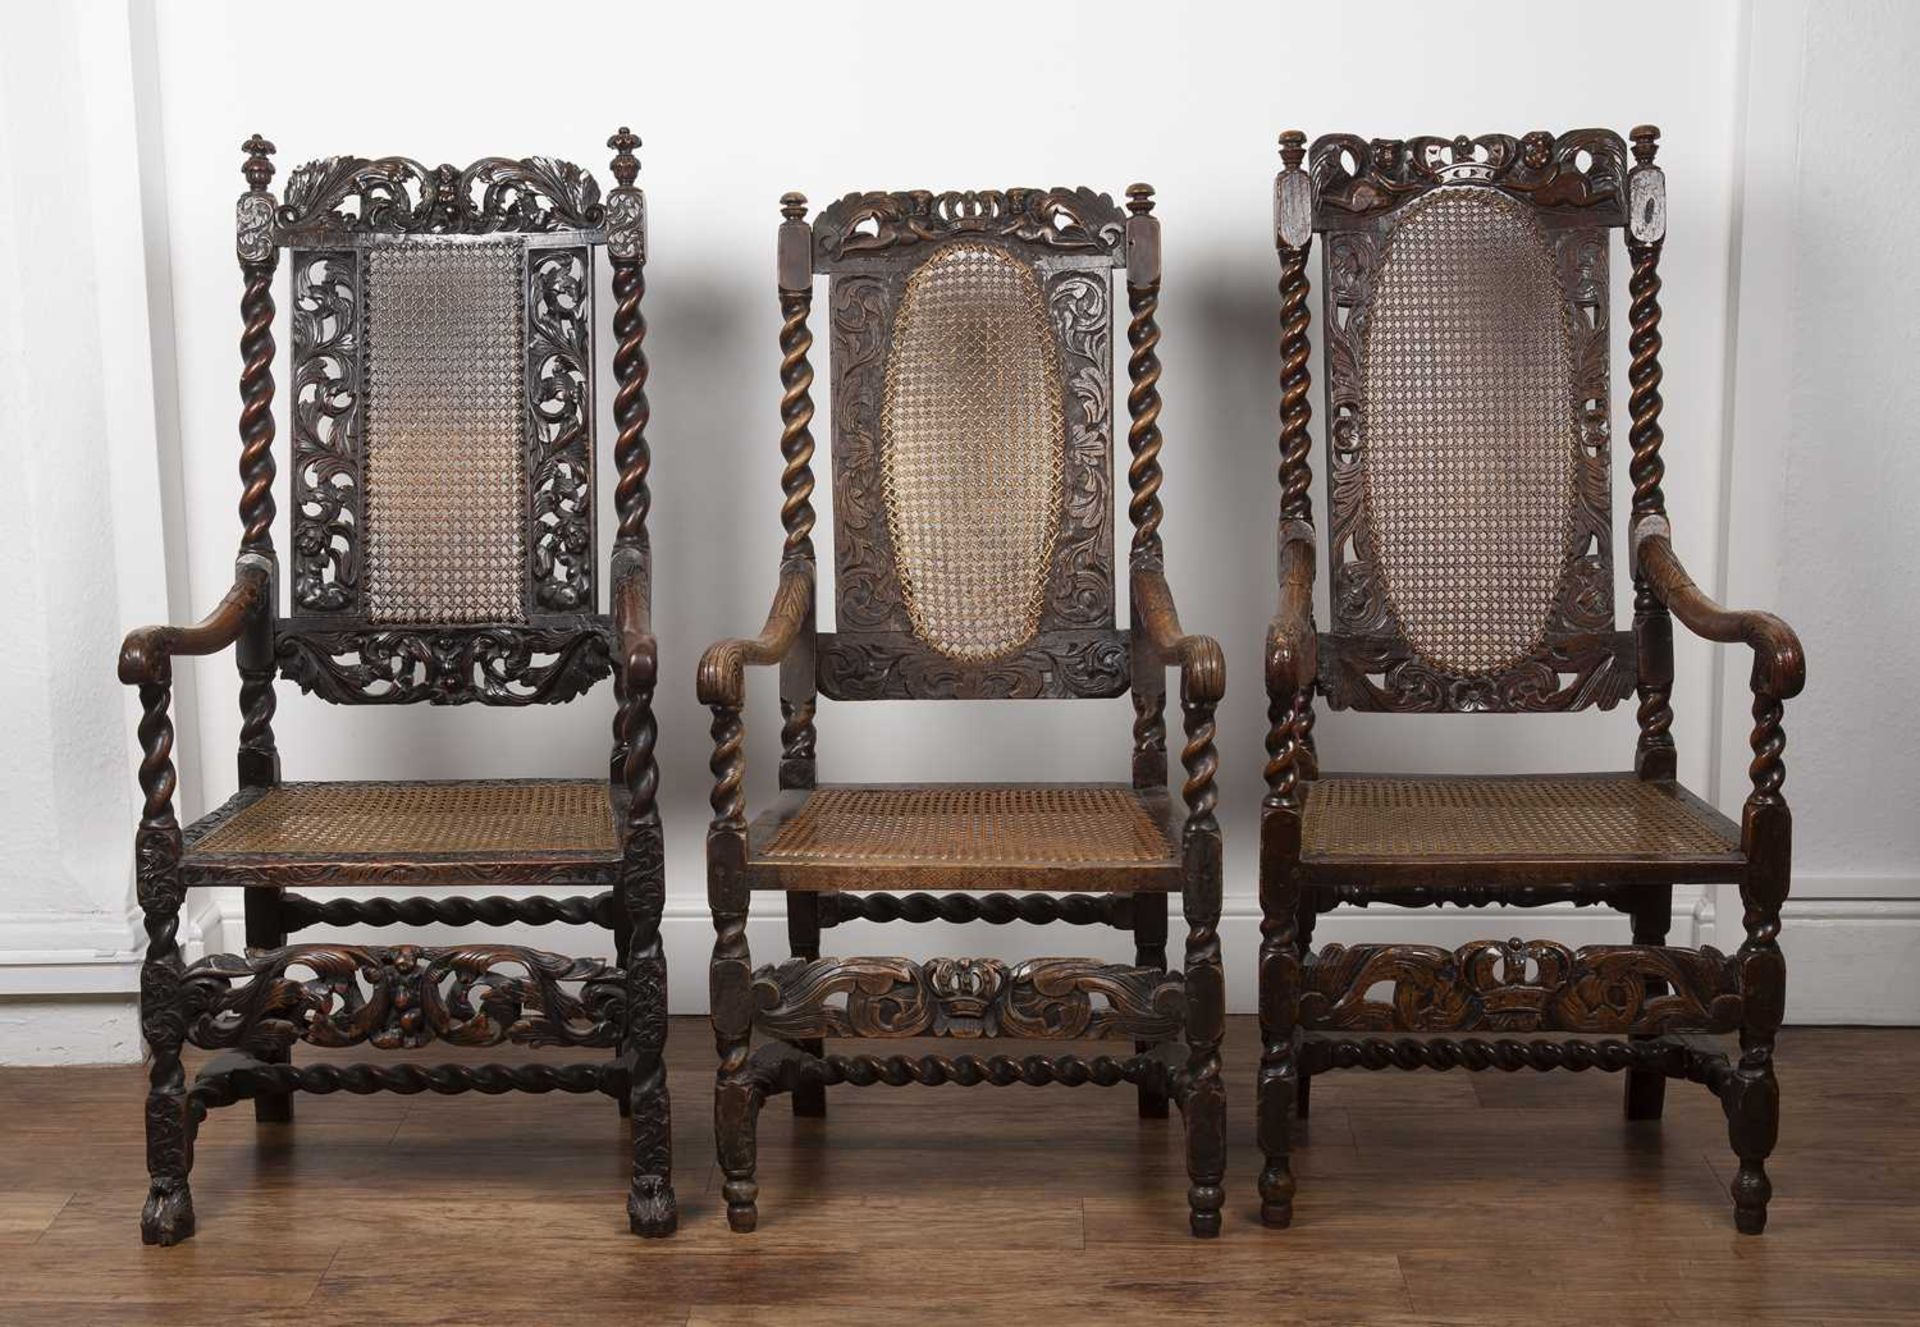 Three similar walnut armchairs Carolean and later, each with carved putti and coronet, and cane - Image 2 of 3